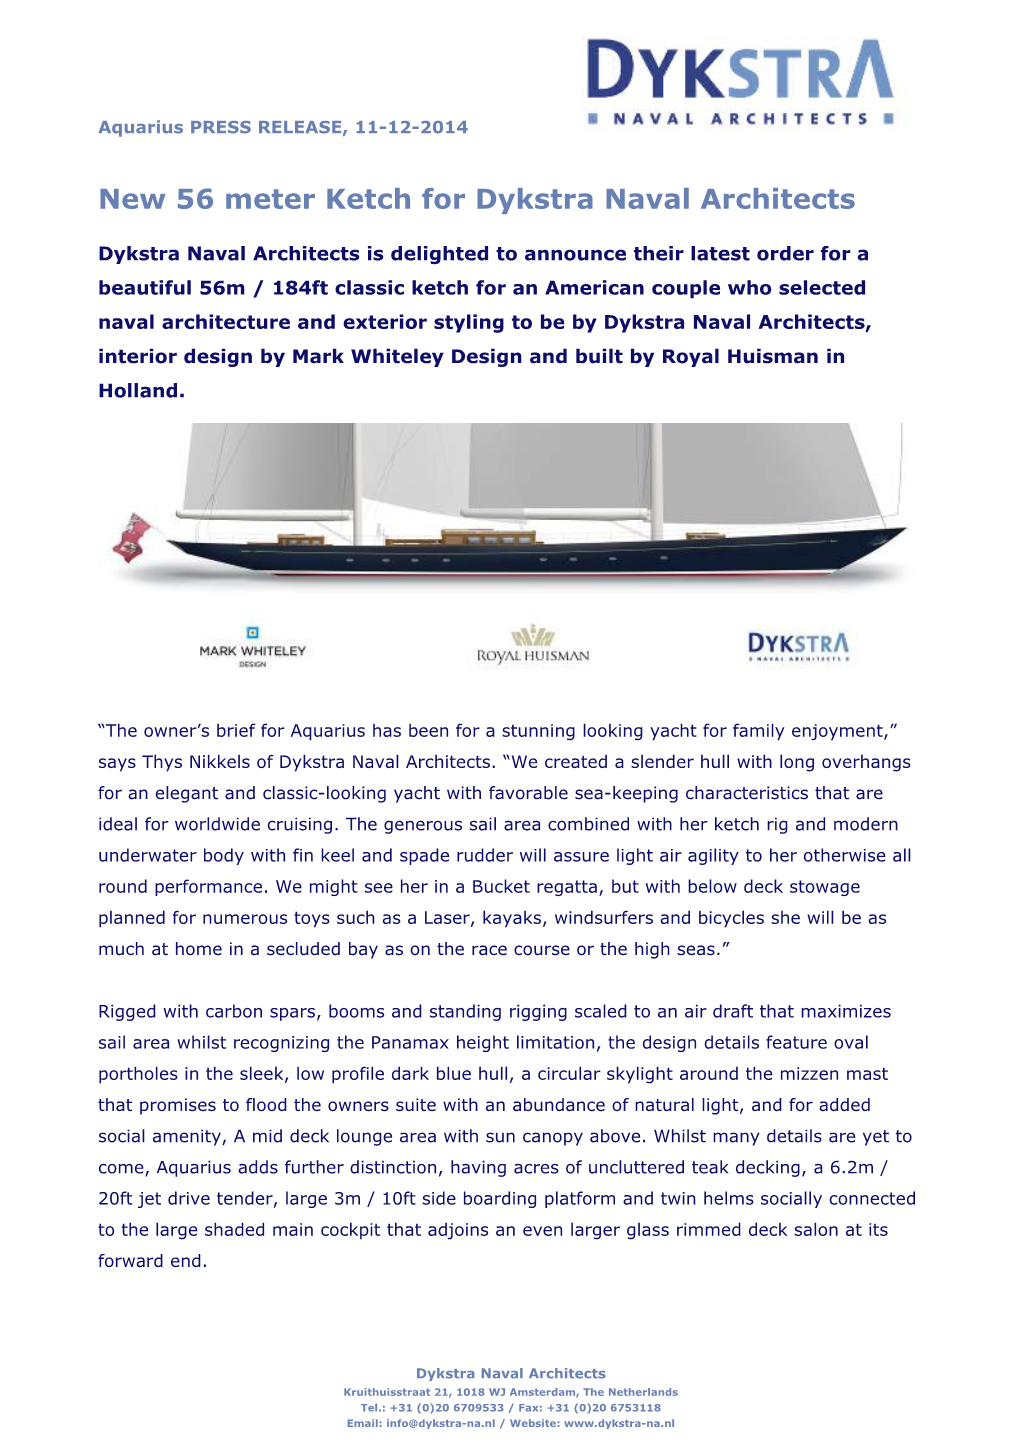 New 56 Meter Ketch for Dykstra Naval Architects